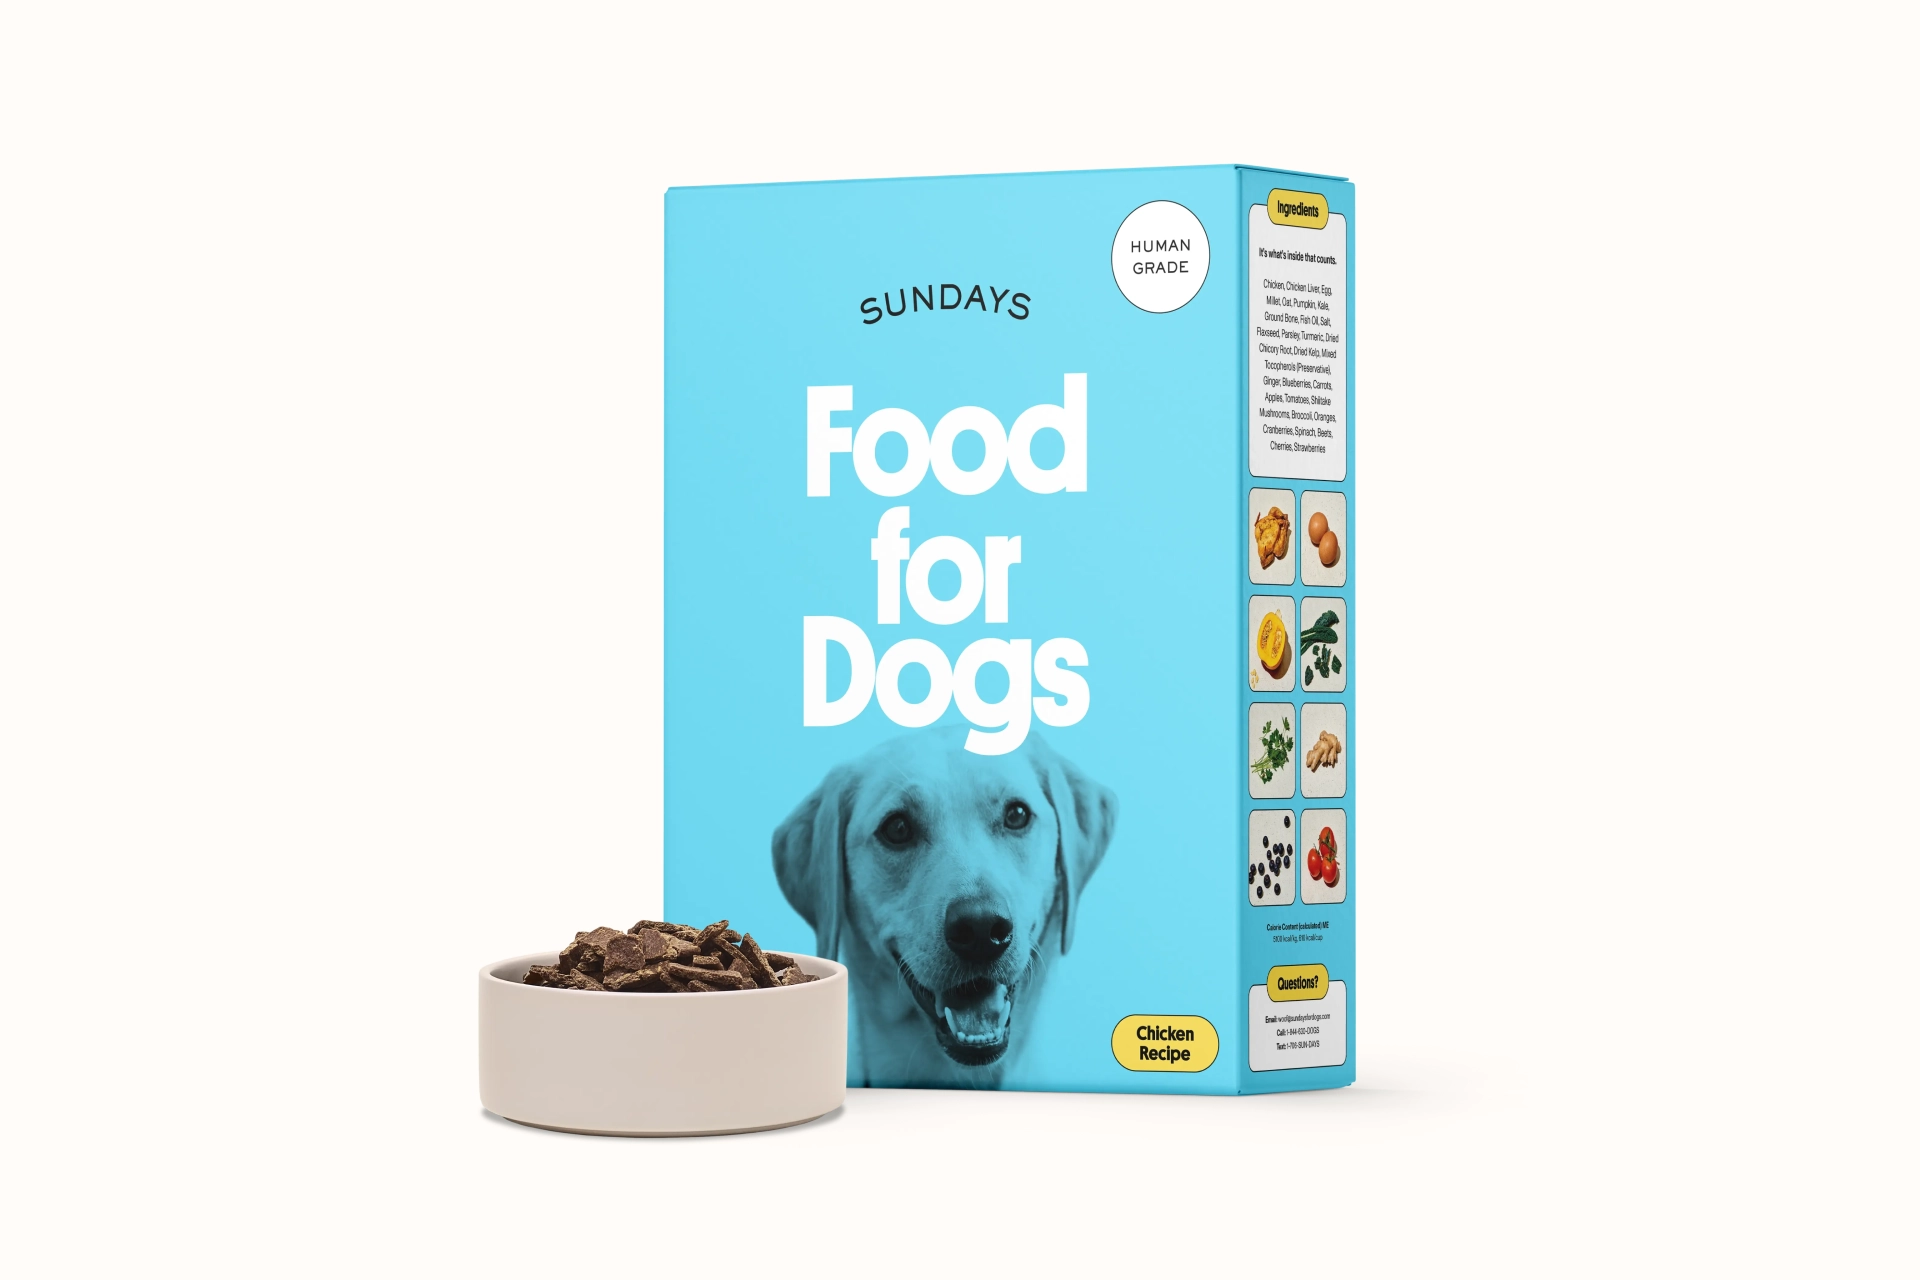 Sundays for Dogs blue box and bowl full of chicken dog food